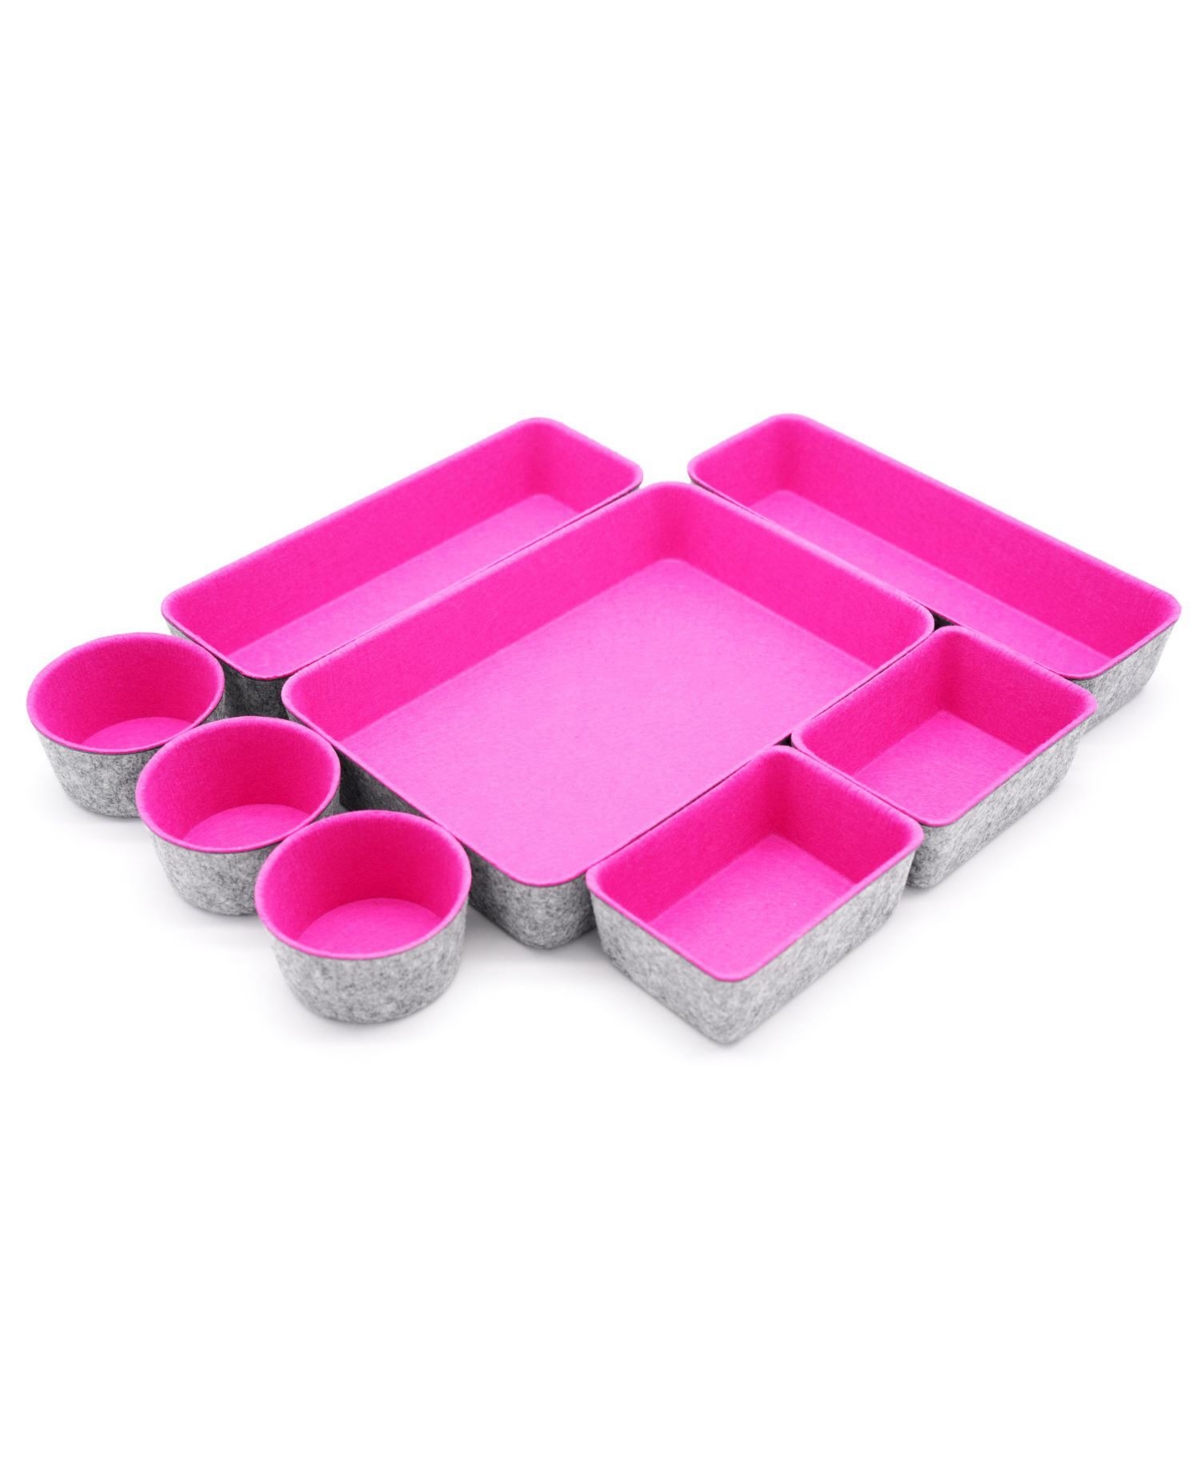 Shop Welaxy 8 Piece Felt Drawer Organizer Set With Round Cups And Trays In Hot Pink